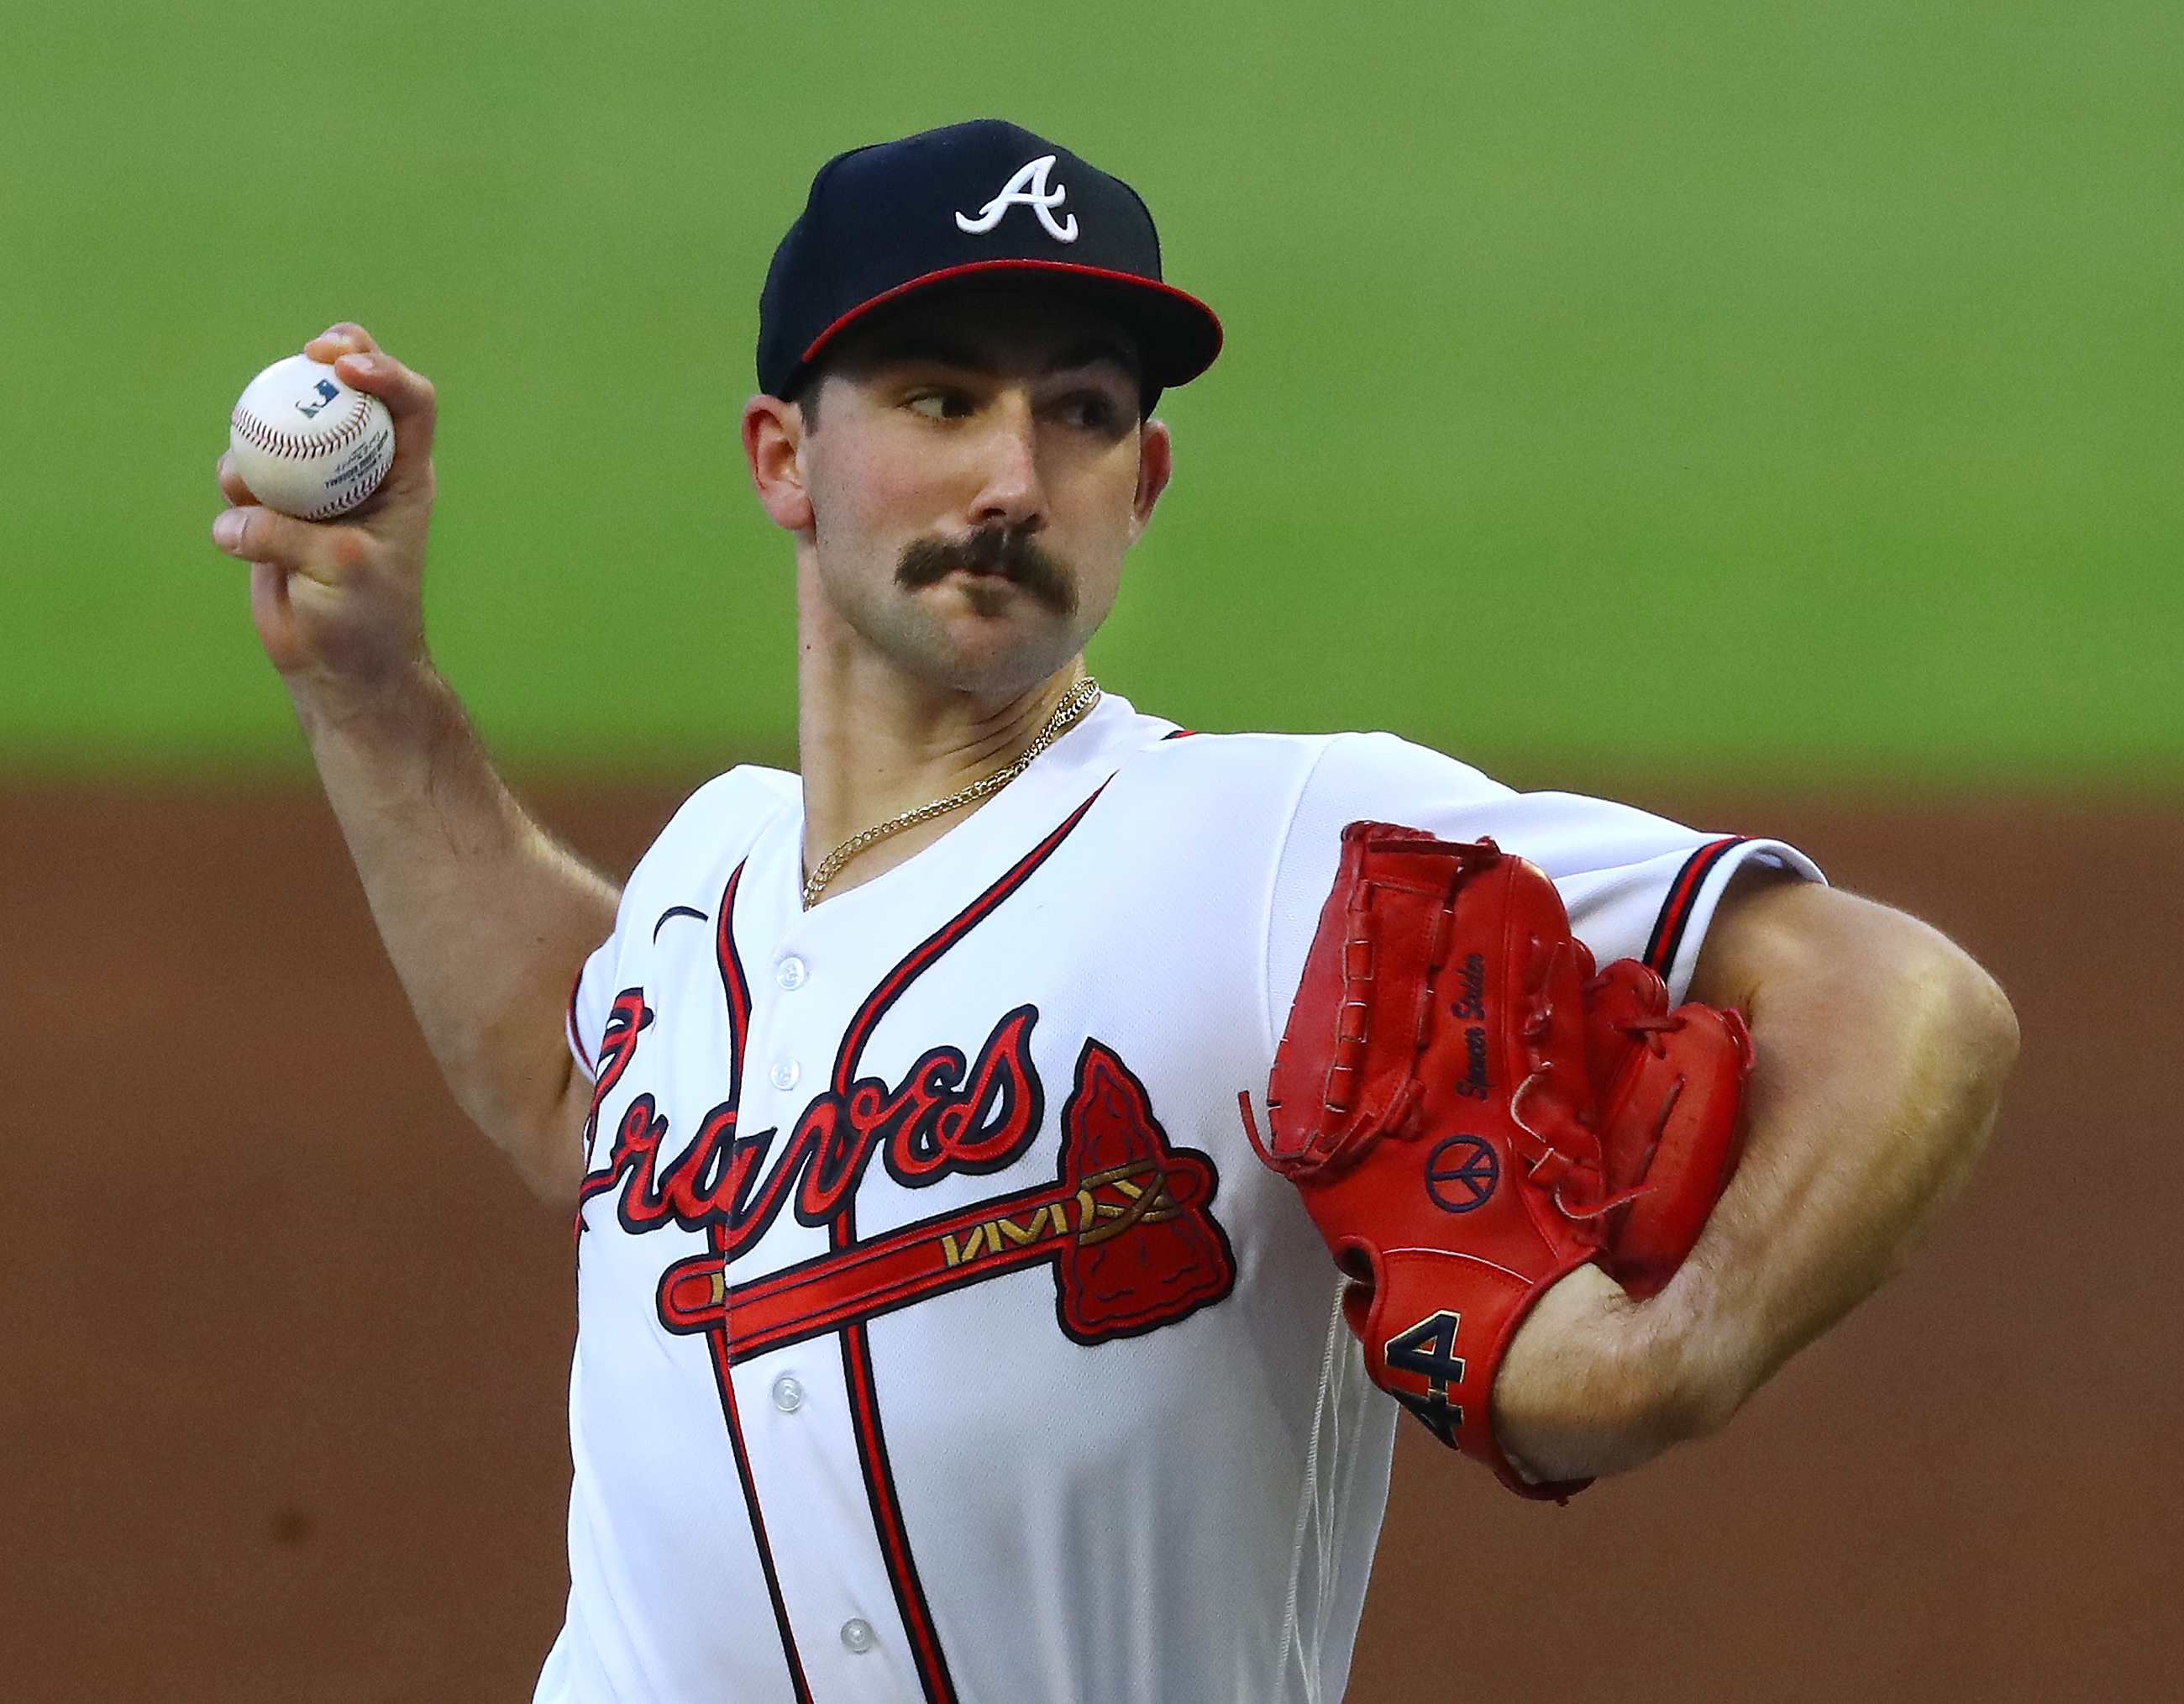 Spencer Strider sets strikeout record as Braves beat Nats